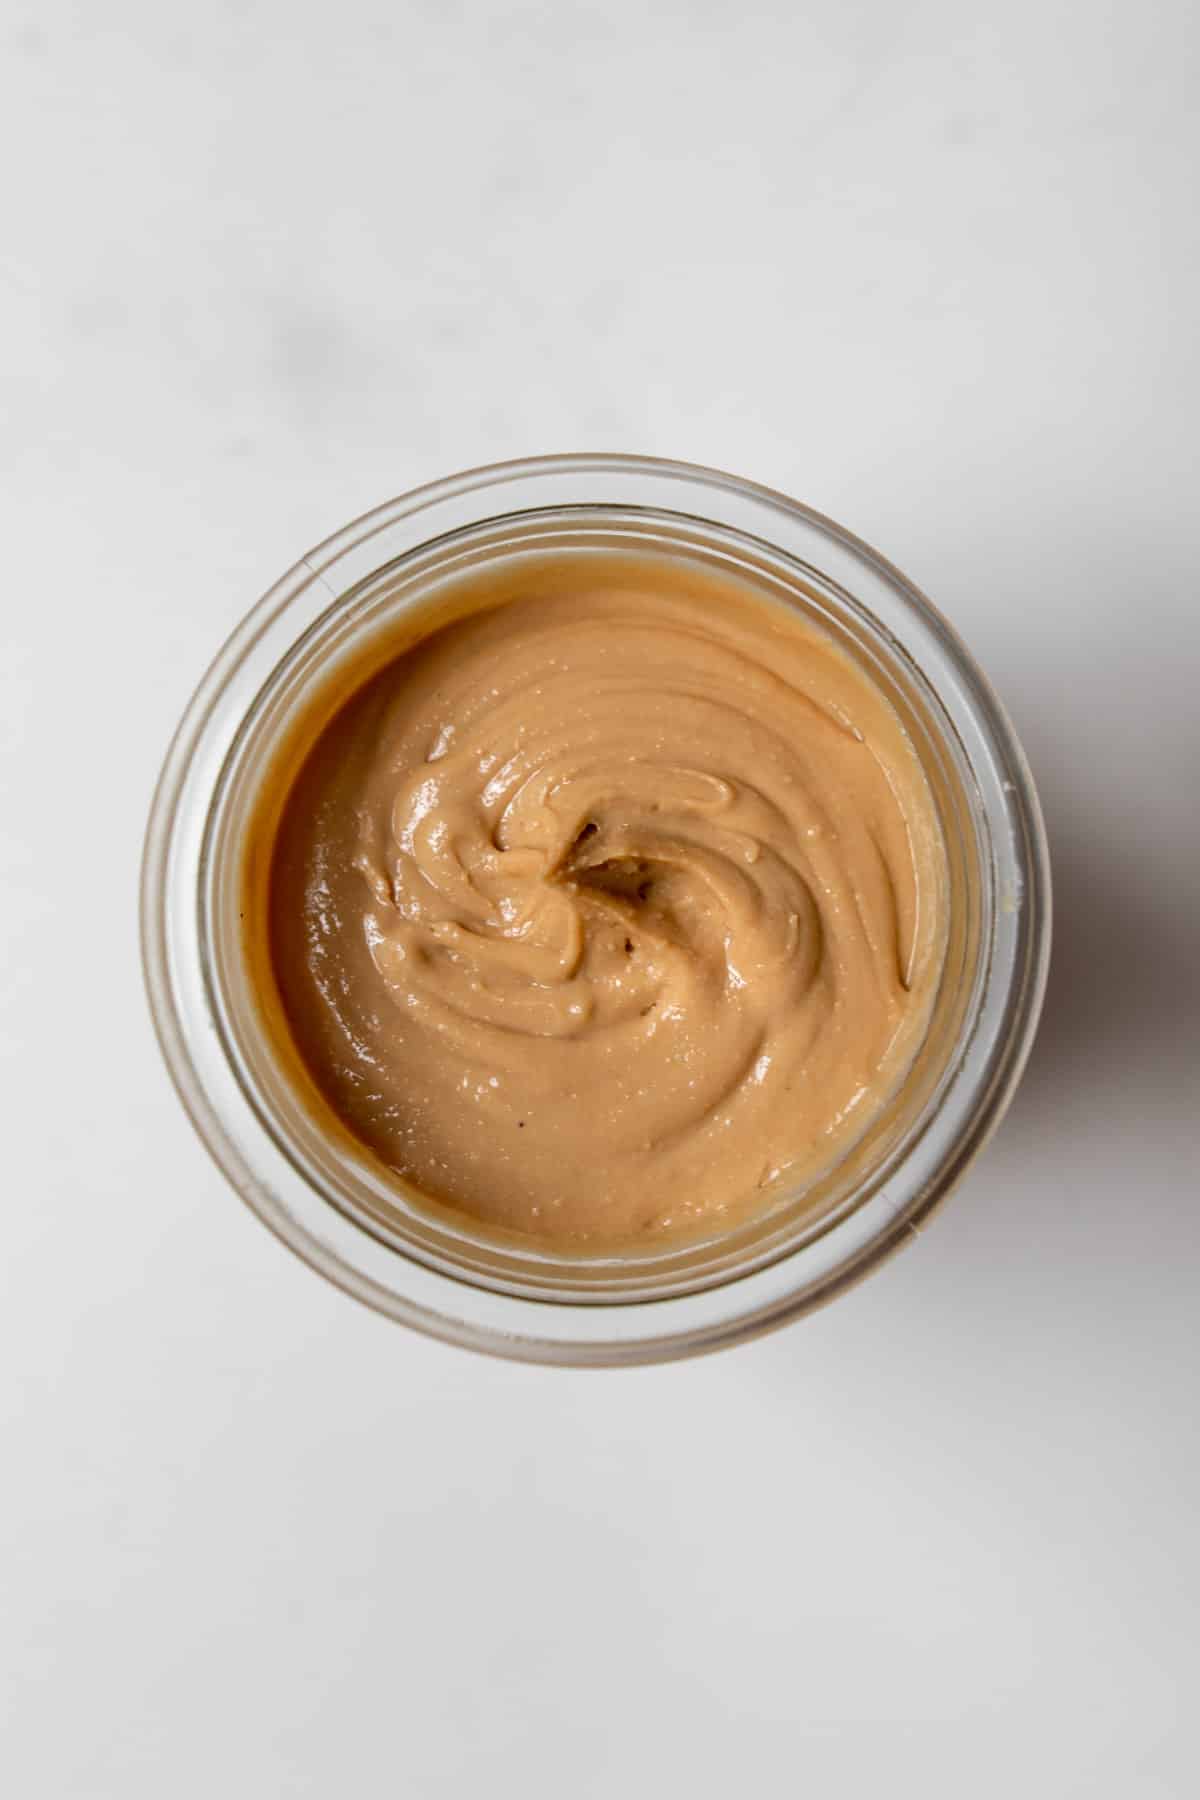 Overhead close-up of cashew butter in a glass jar.